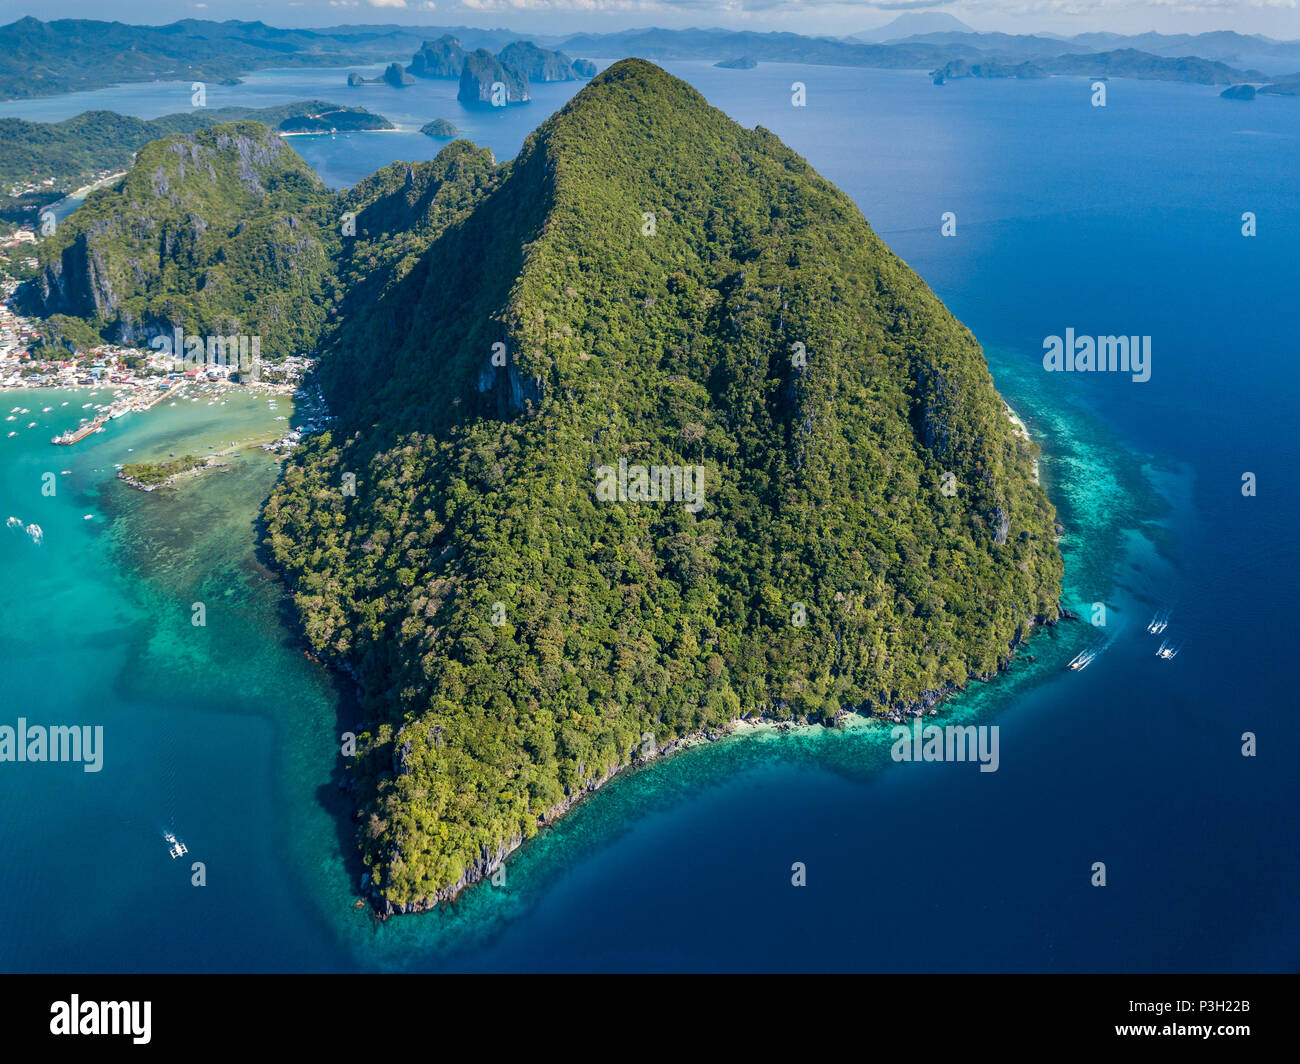 Aerial drone view of boats, coral reef and the town of El Nido in the Philippines Stock Photo